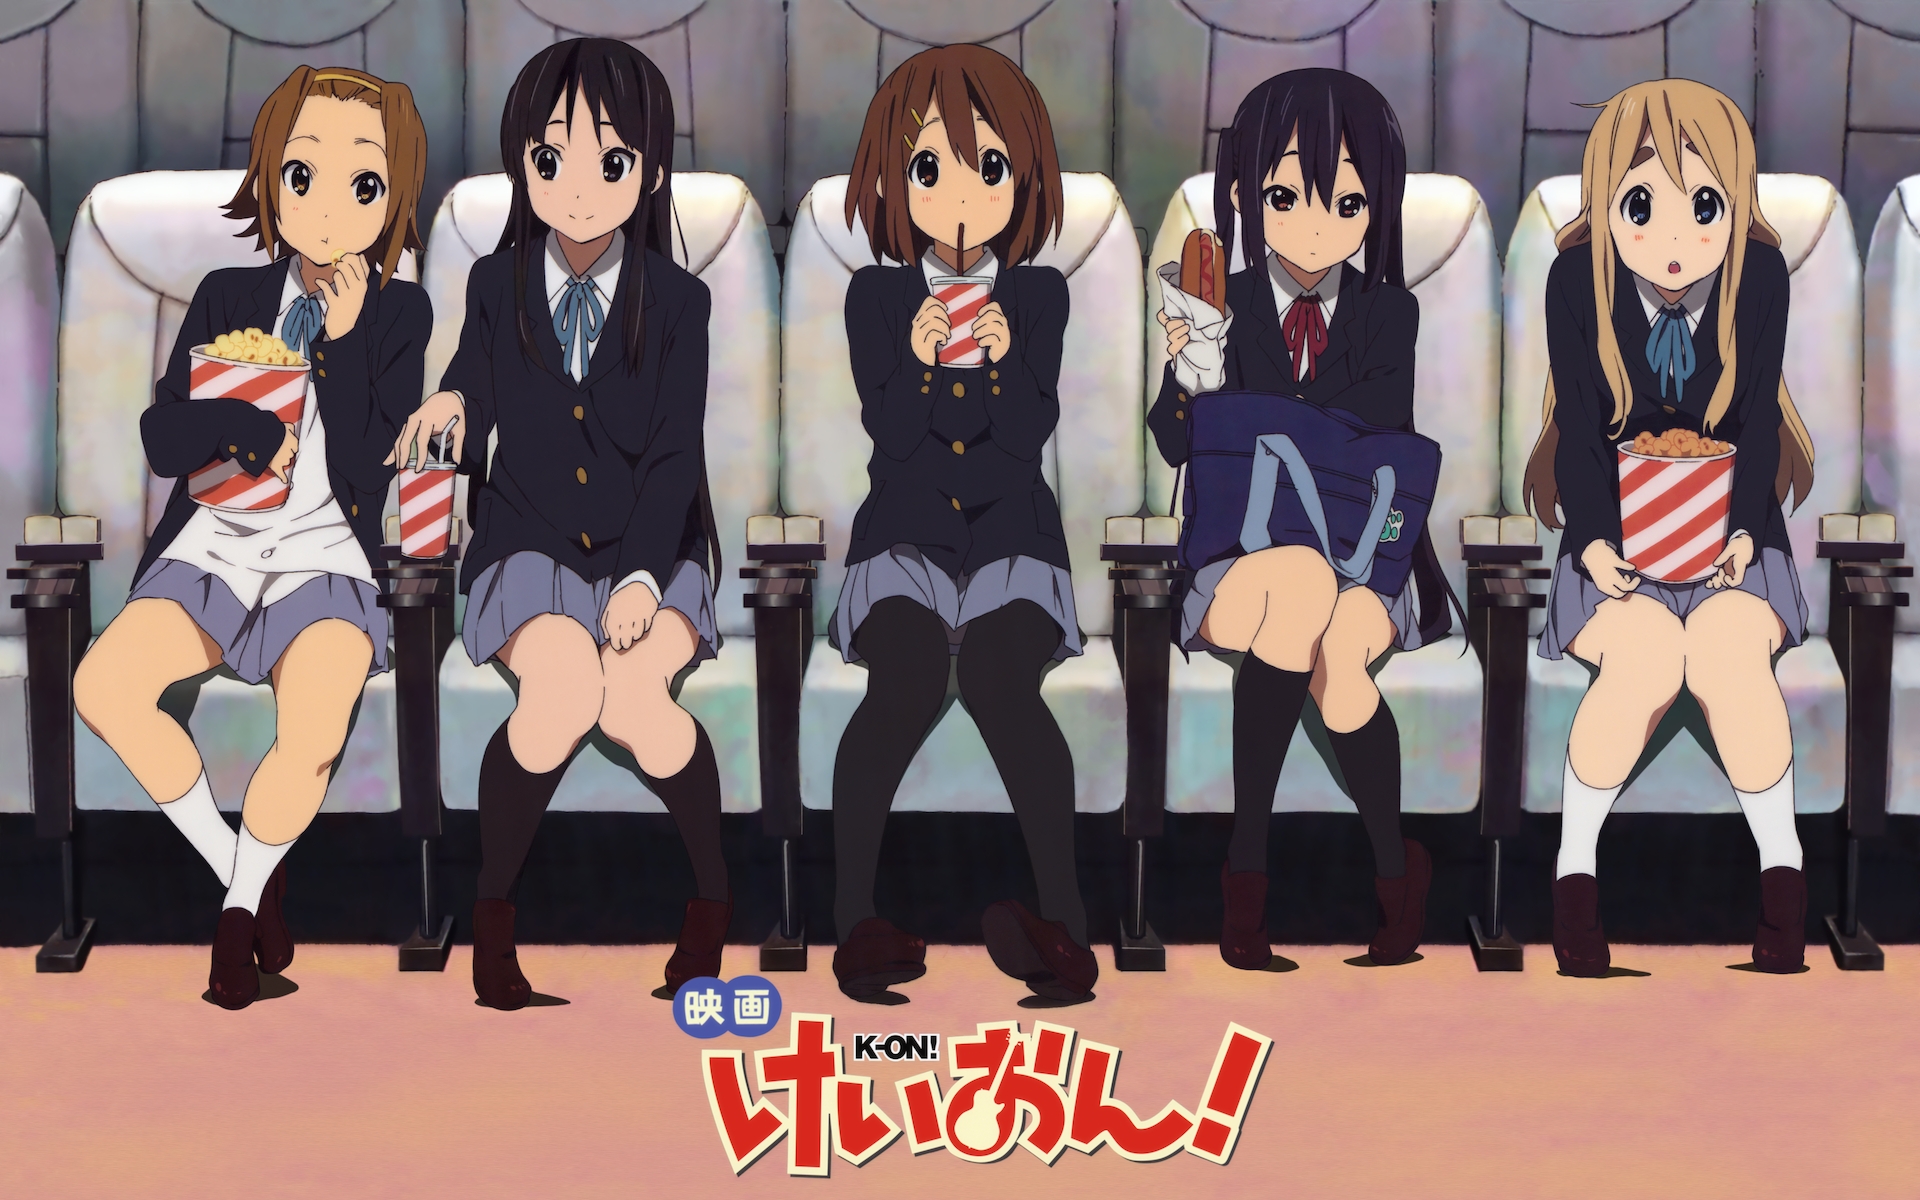 K-ON! Backgrounds, Compatible - PC, Mobile, Gadgets| 1920x1200 px